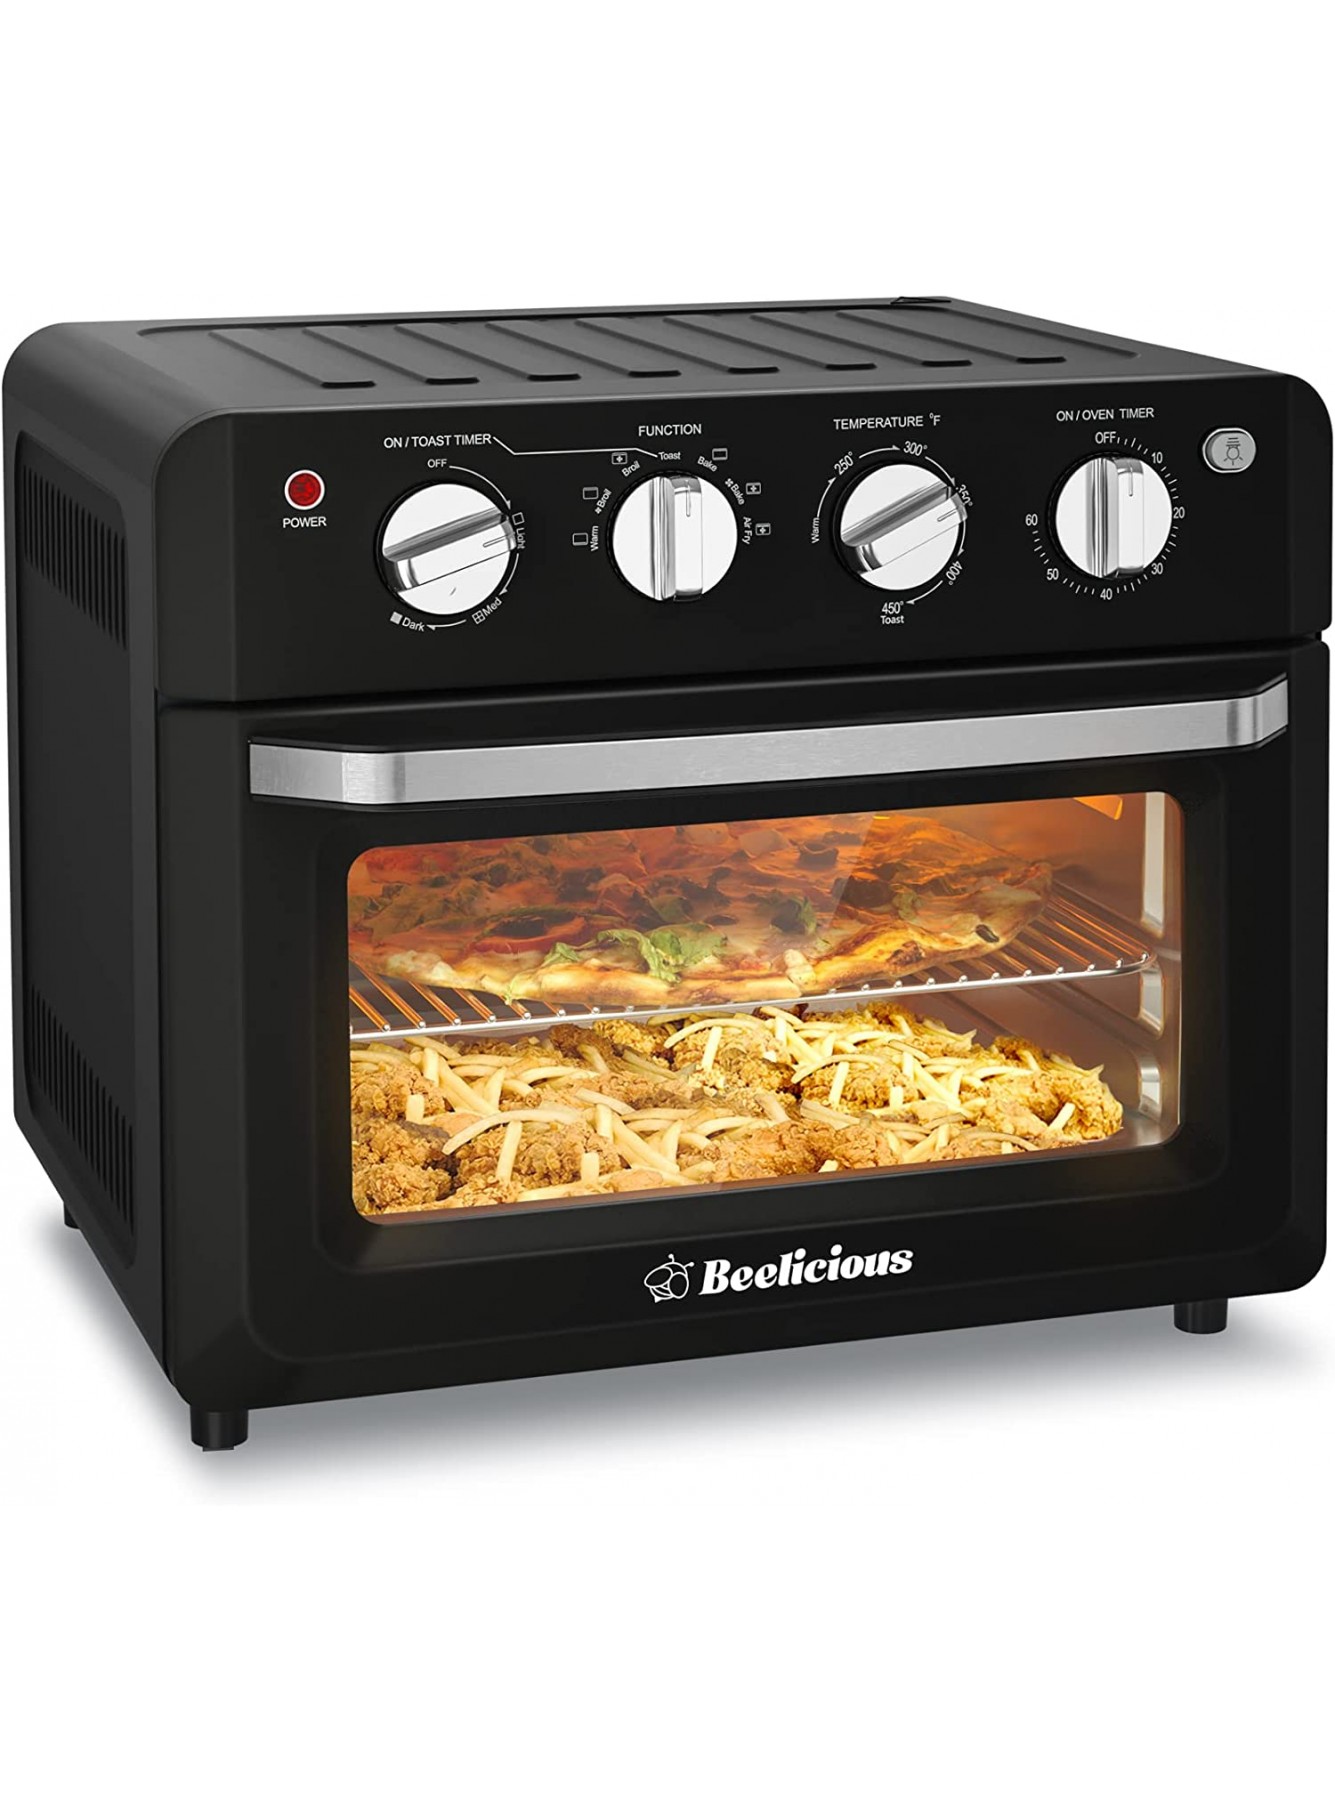 Beelicious Air Fryer Toaster Oven Combo 19QT Large Air Fryer Oven 6 Slices Convection Oven Countertop Bake 12 Pizza Include 4 Accessories & Cookbook Matte Black ETL Certified B09R7GDLVB